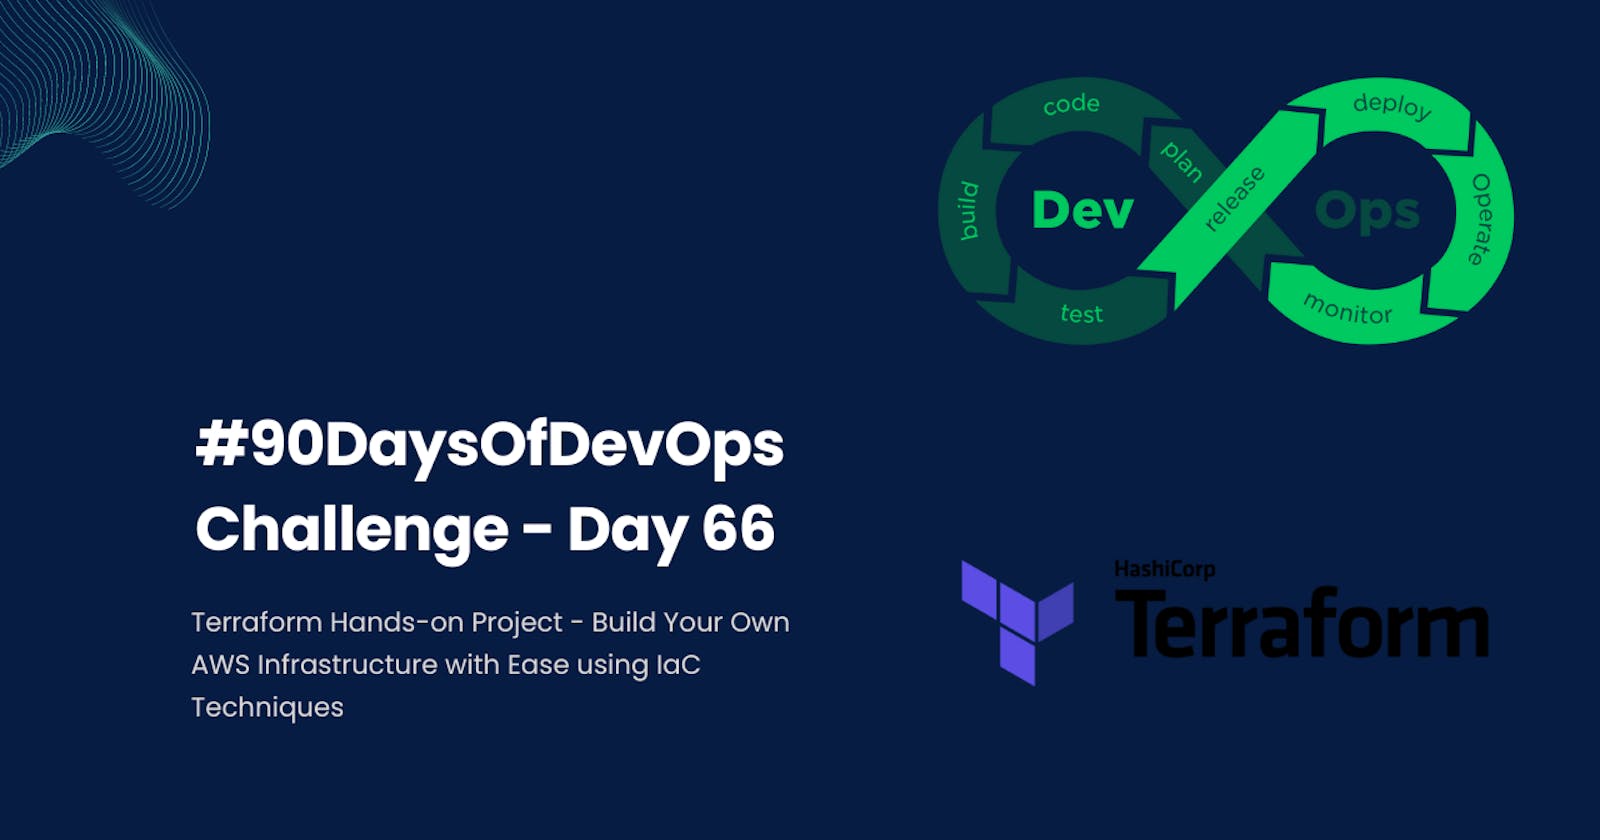 #90DaysOfDevOps Challenge - Day 66 - Terraform Hands-on Project - Build Your Own AWS Infrastructure with Ease using IaC Techniques